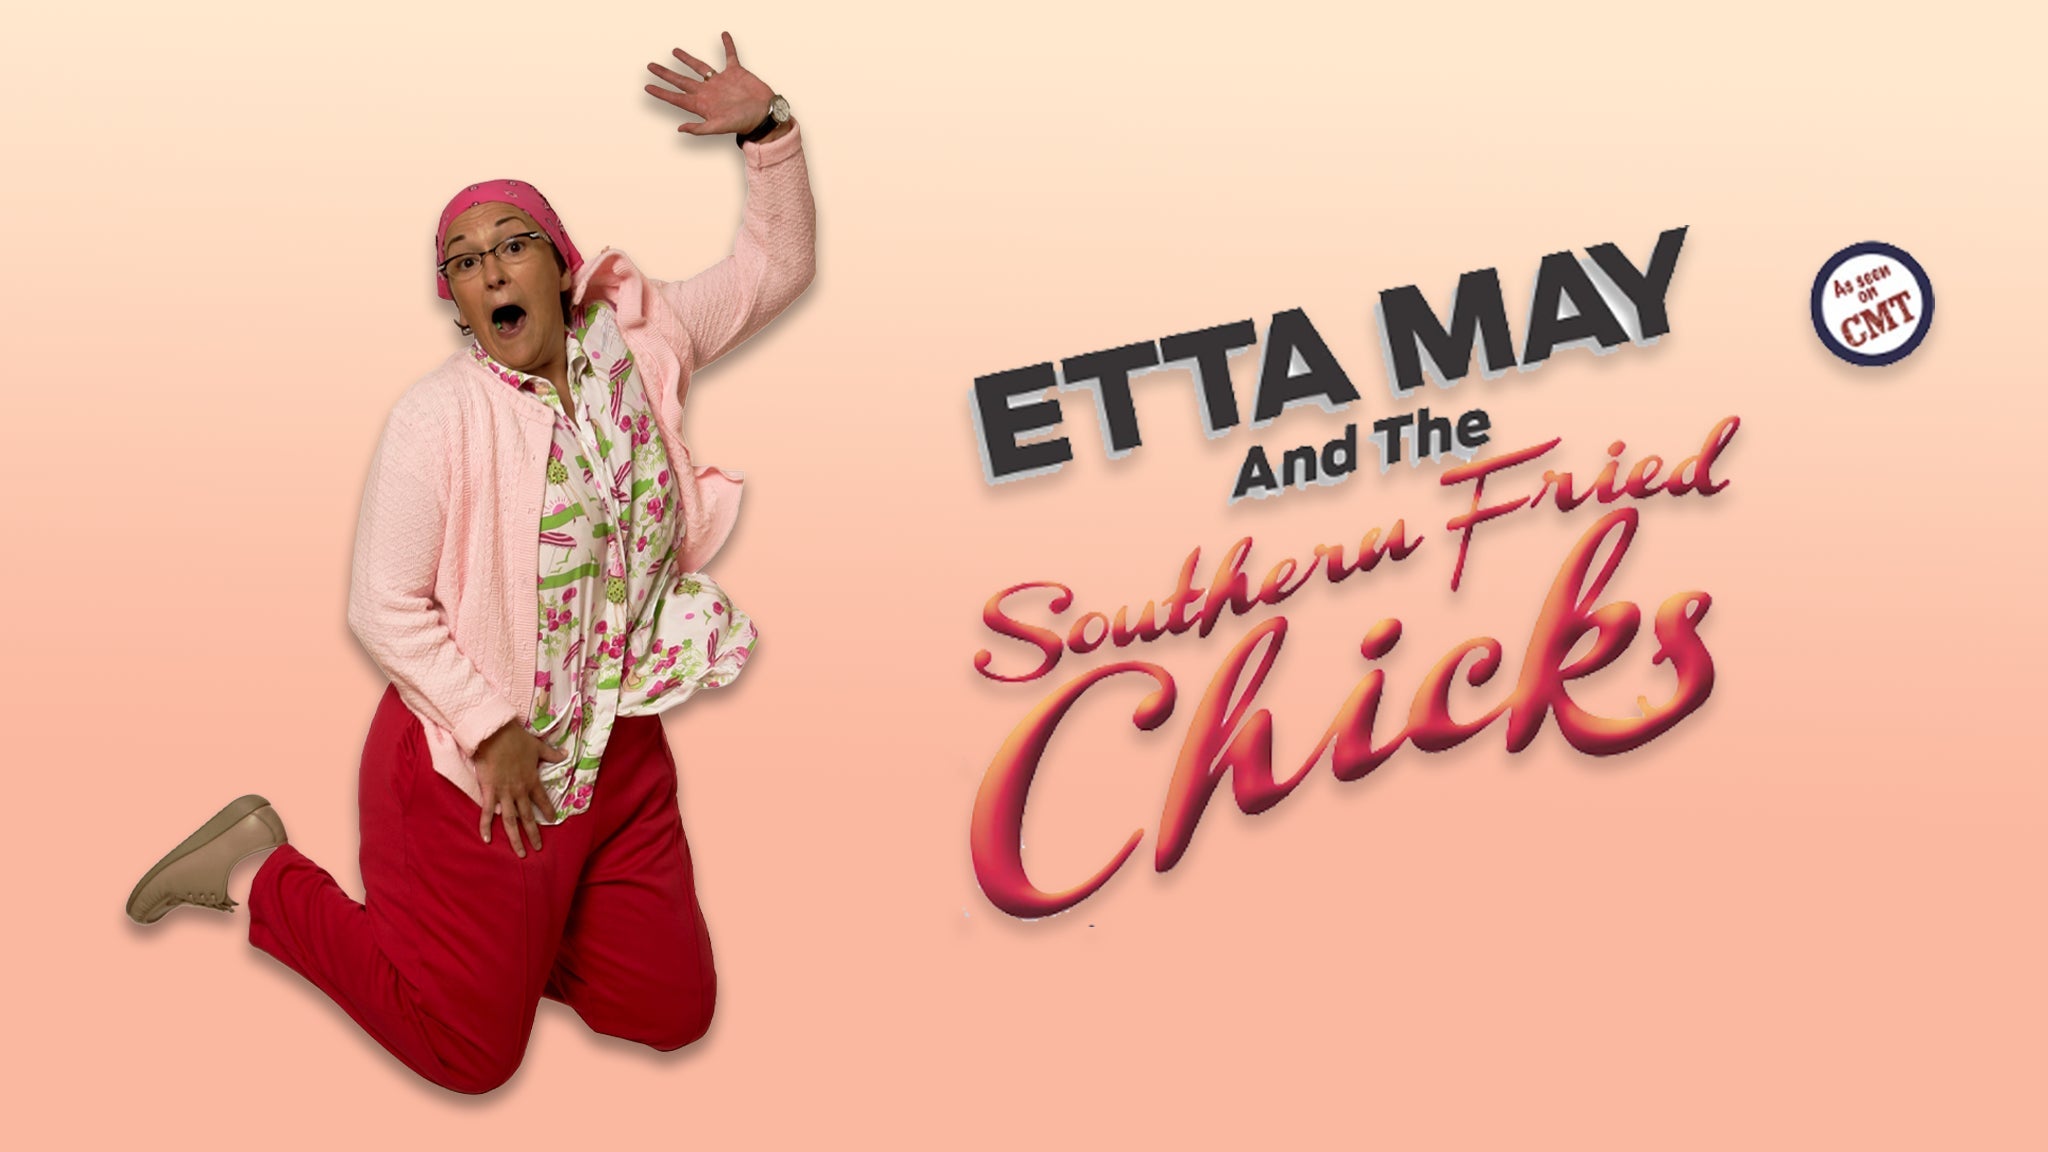 Etta May & The Southern Fried Chicks at Paramount Theatre